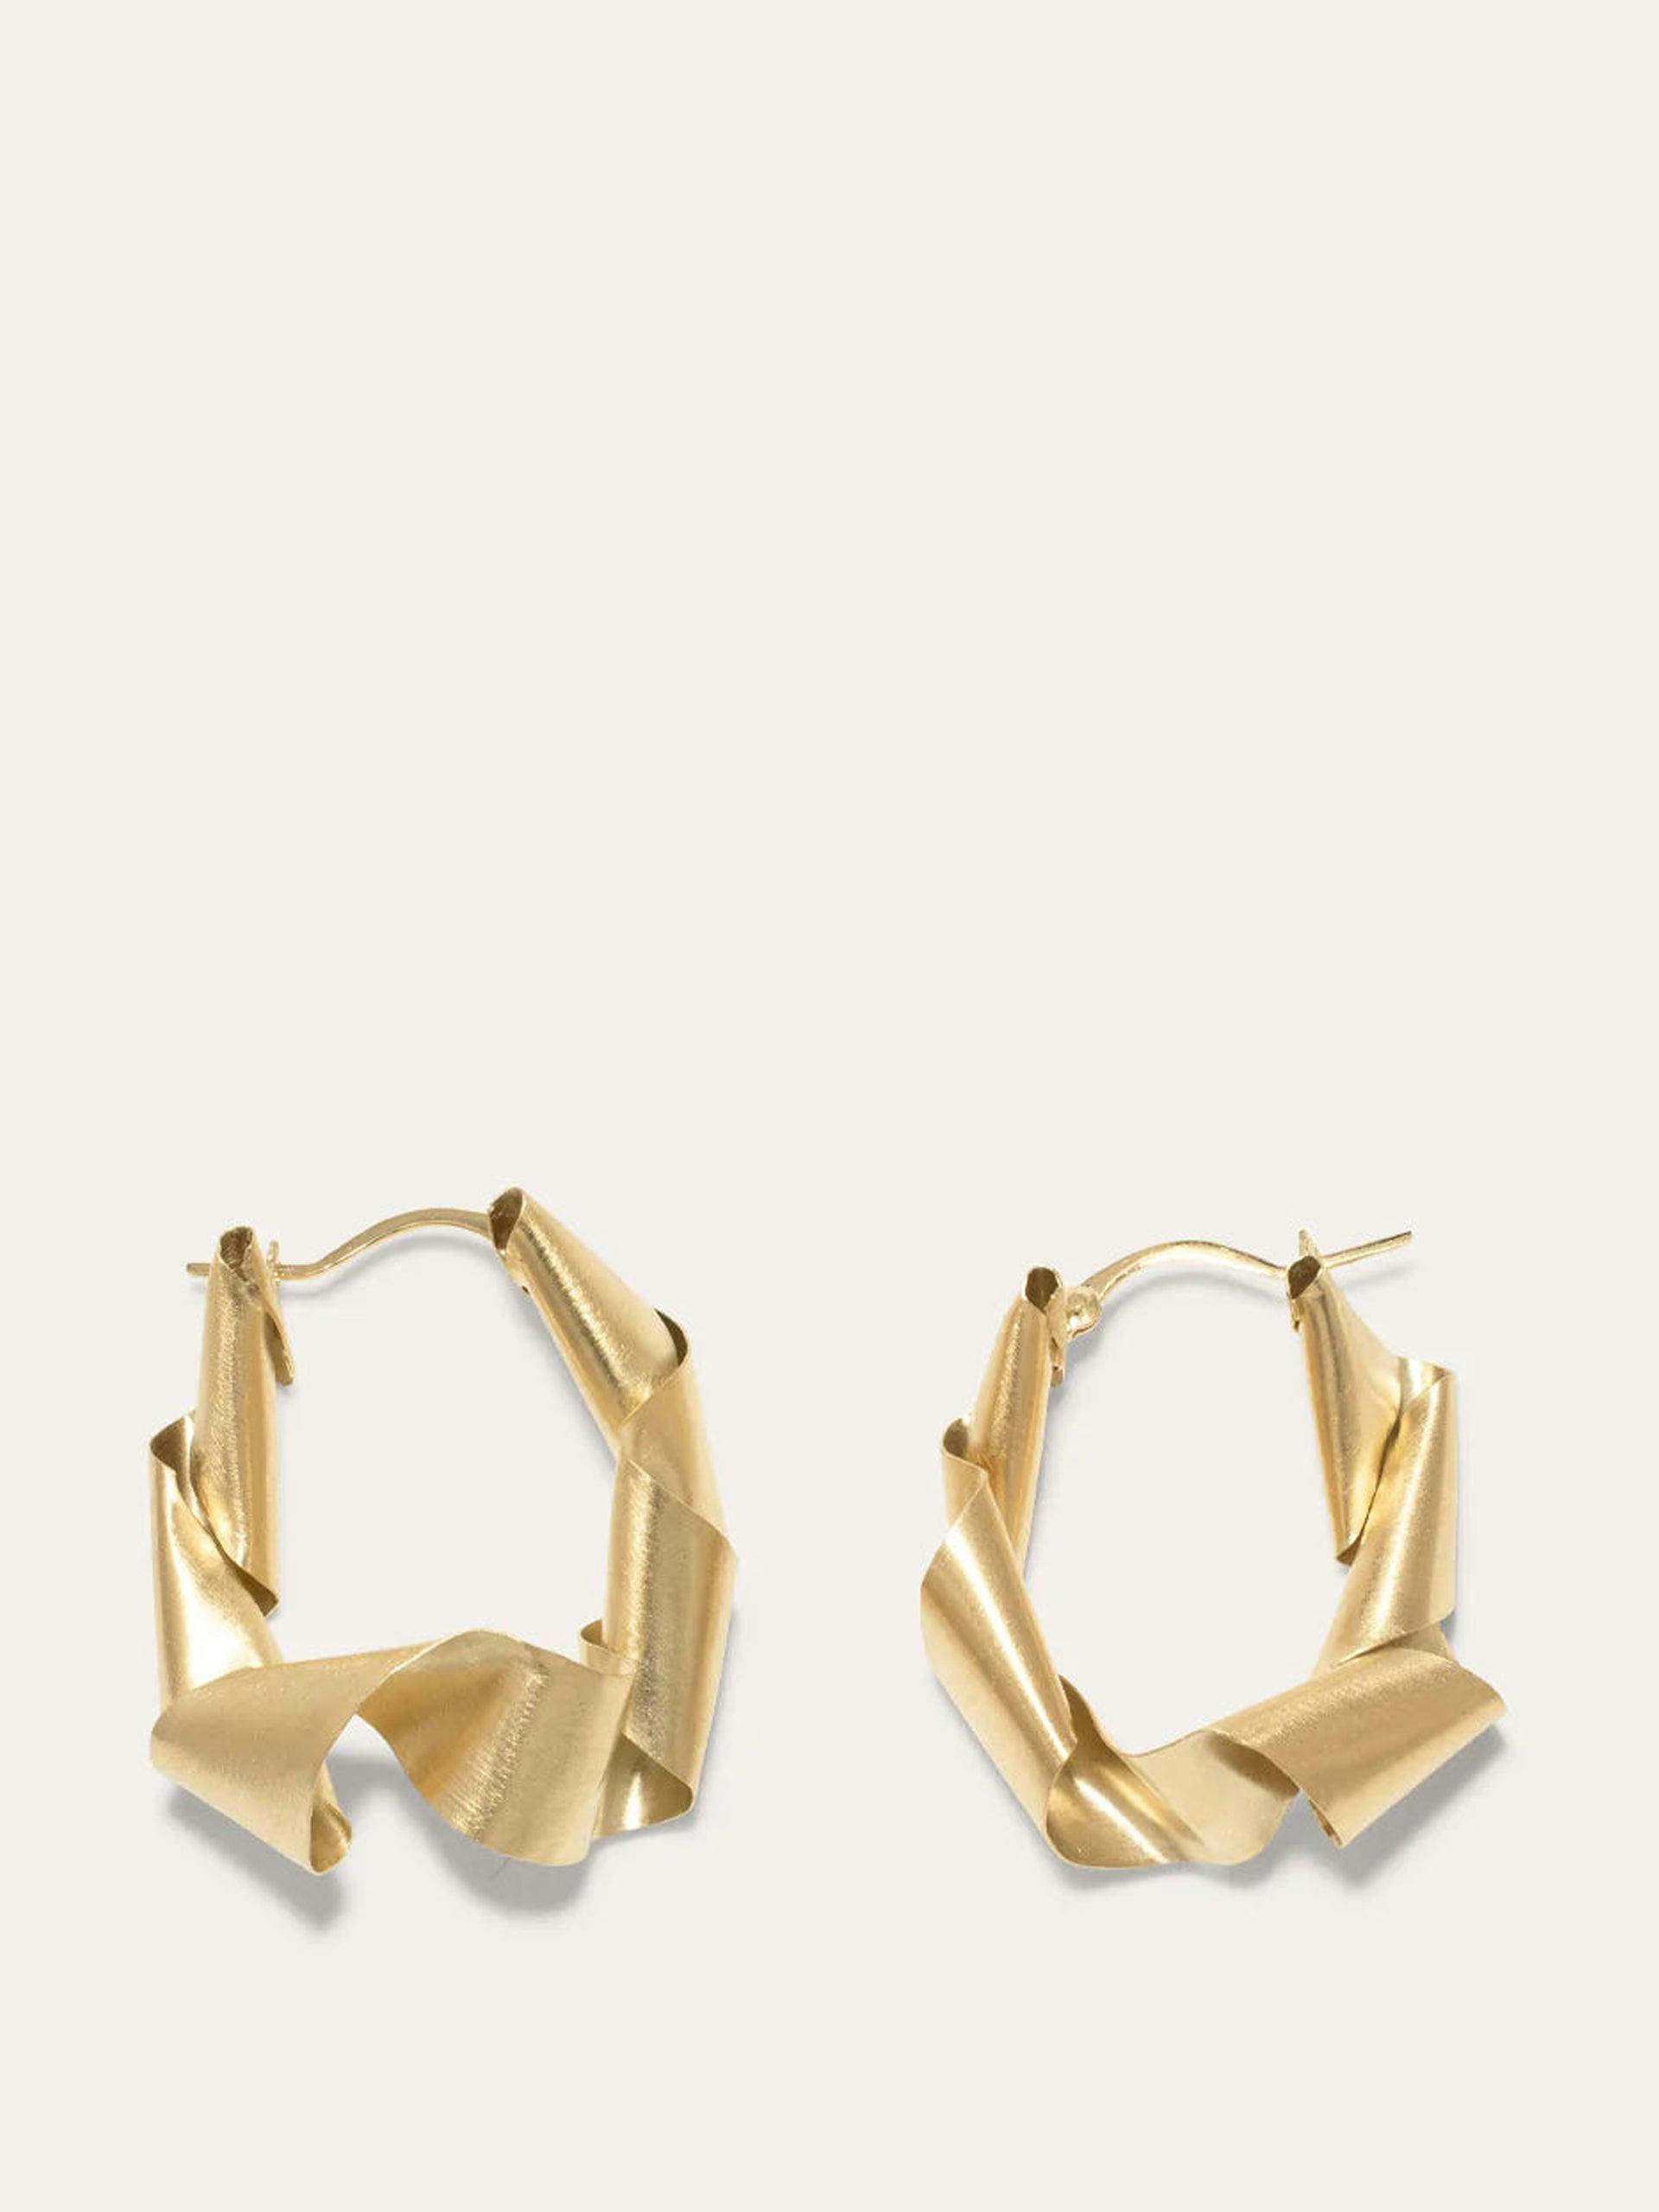 "This is What Happens When the Paper Shredder Malfunctions III" gold vermeil earrings